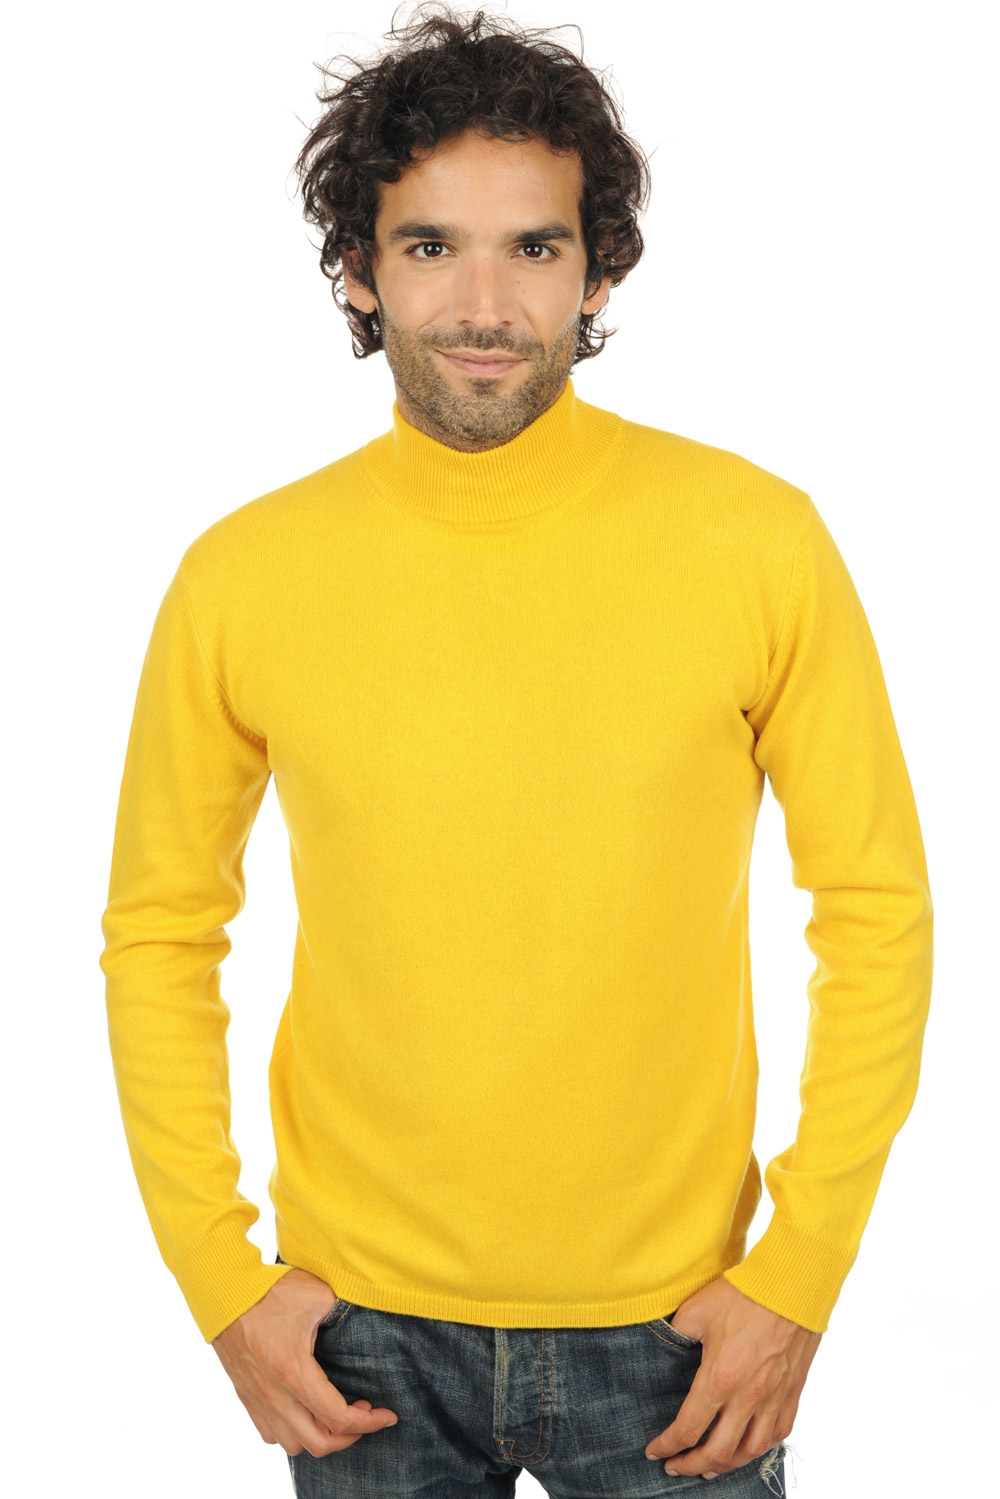 Cashmere men frederic cyber yellow 3xl